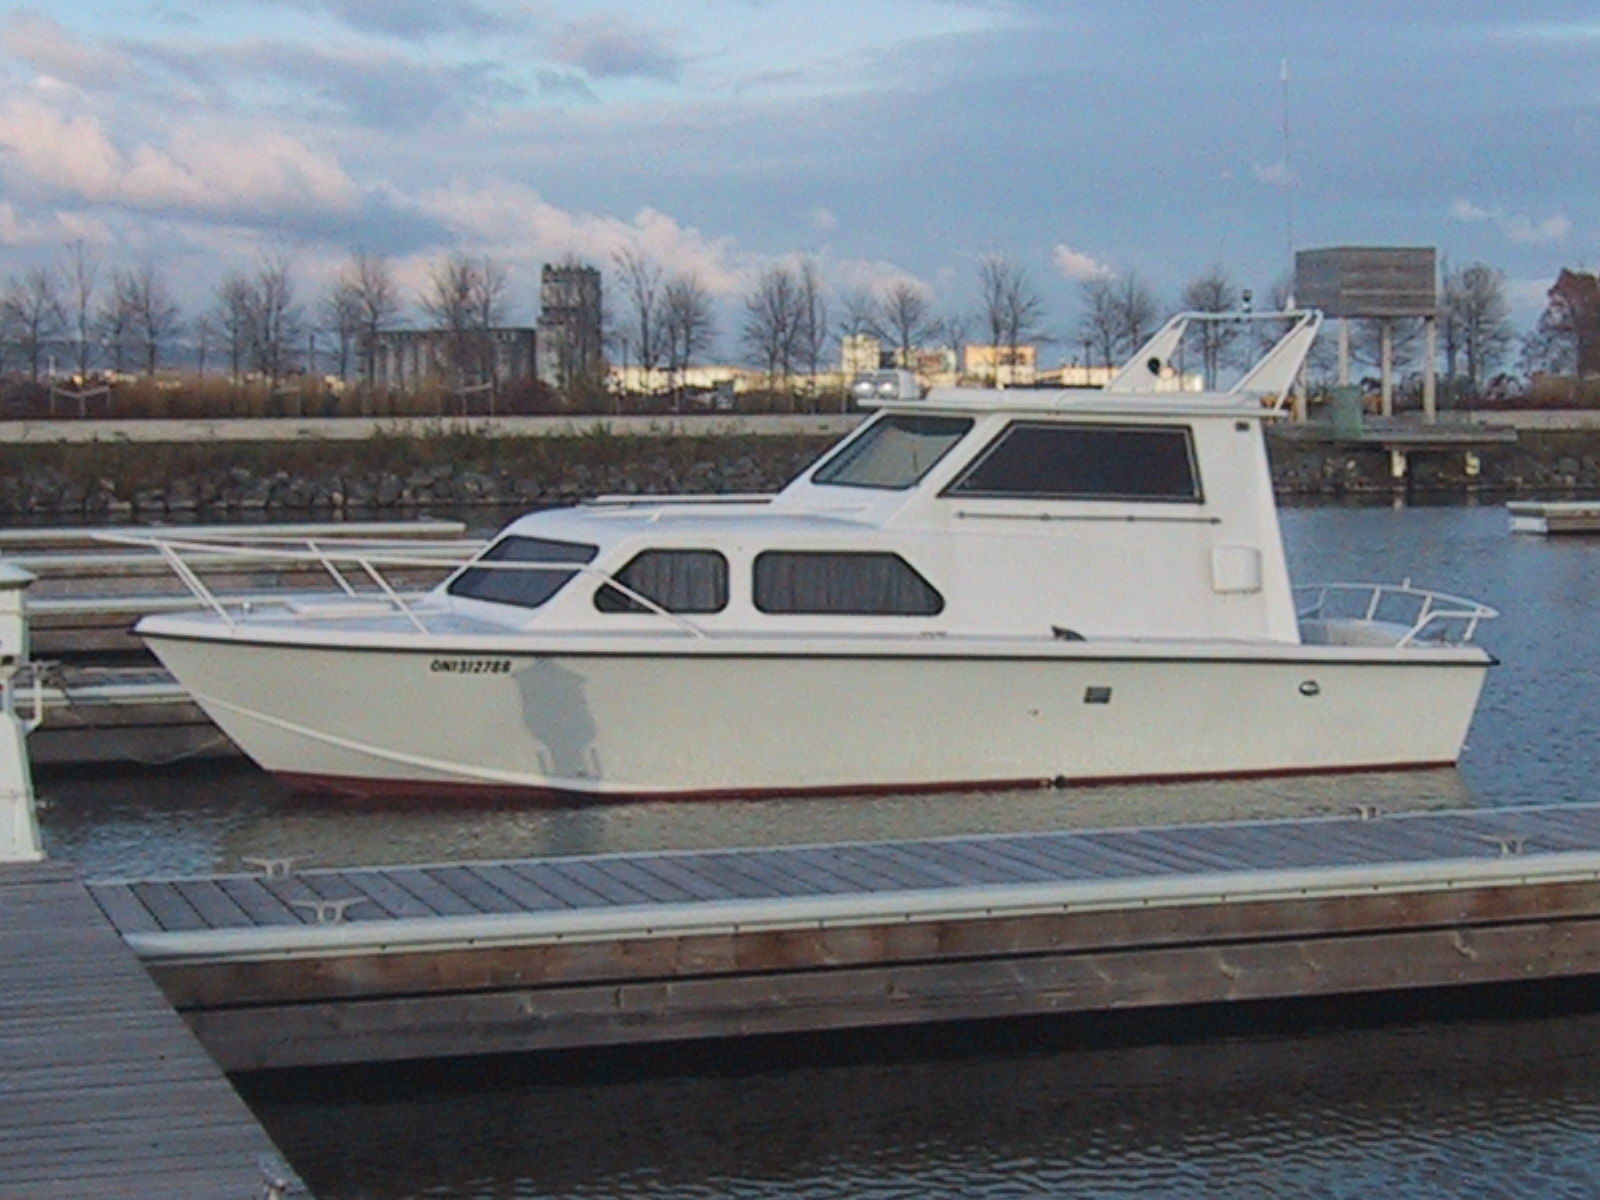 Boat Cabin Cruiser Chris Craft 1975 for sale for $ - Boats ...